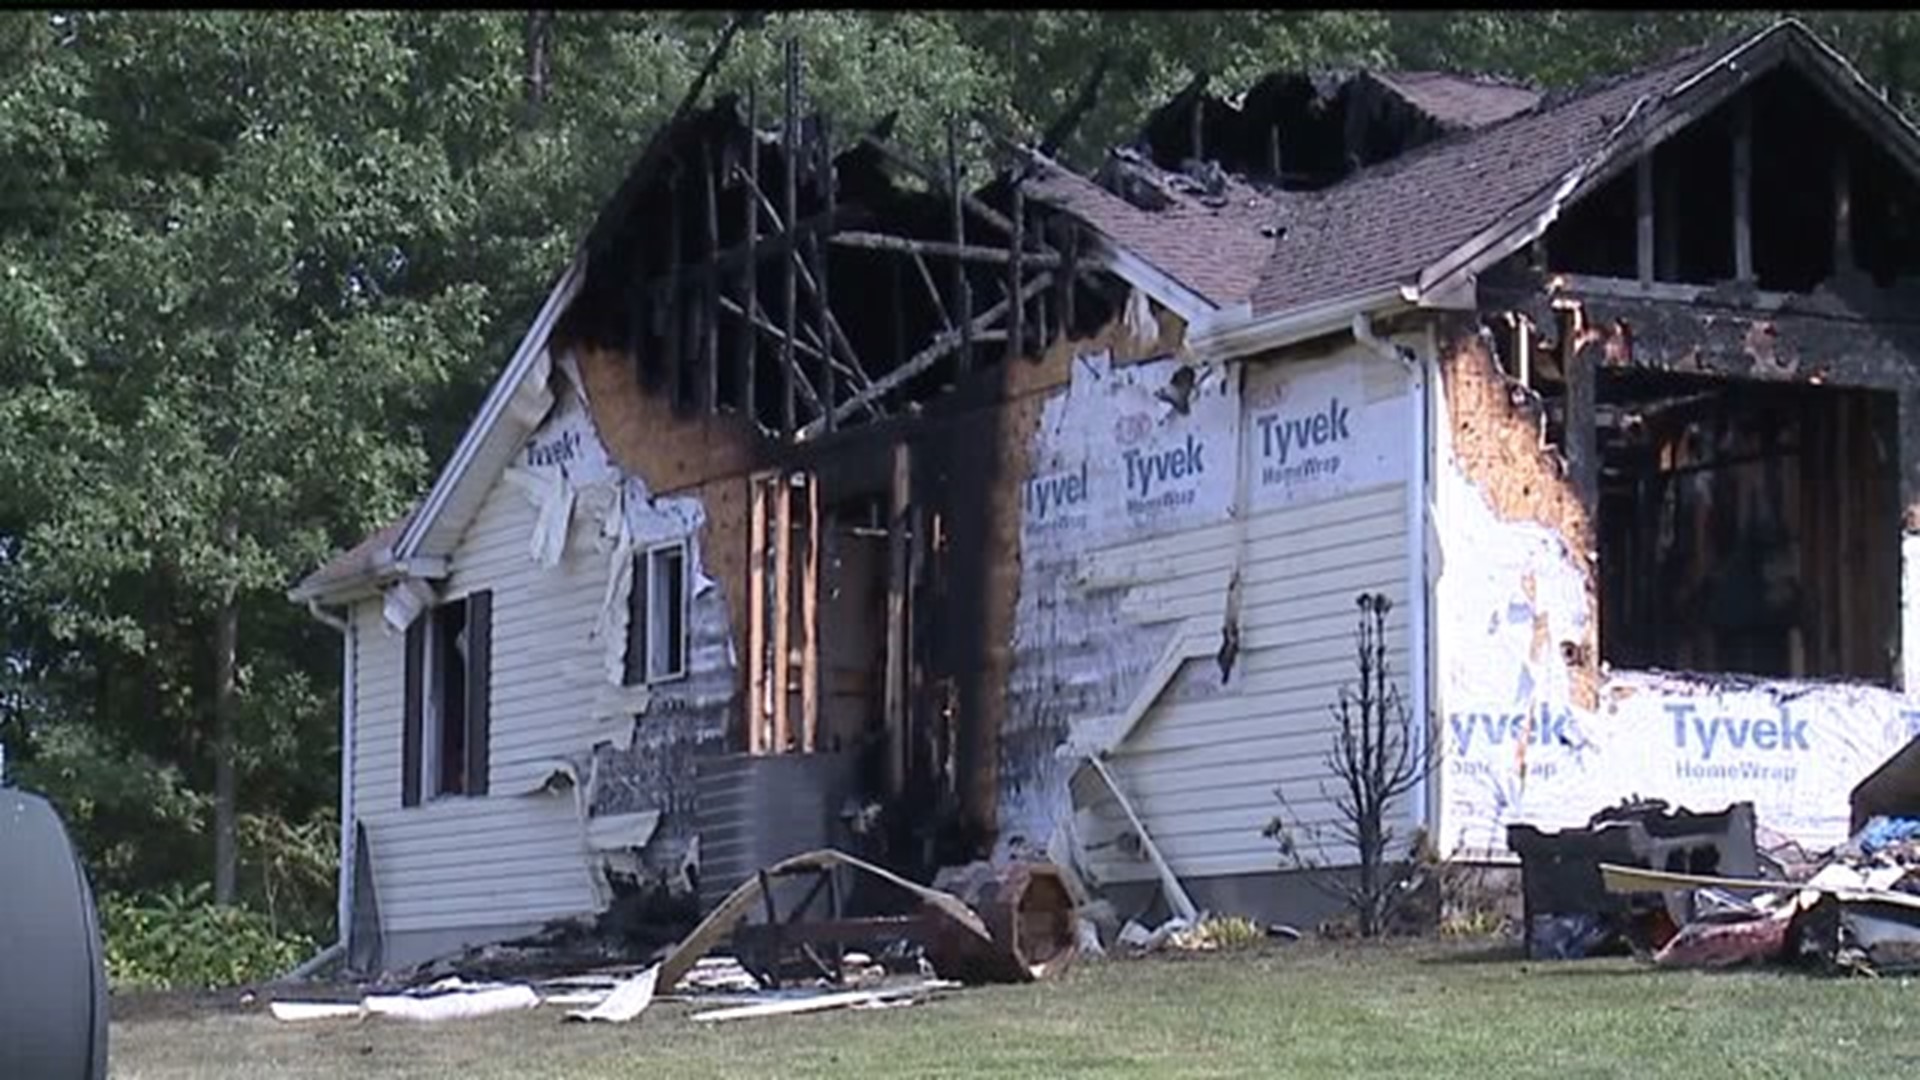 Police investigating fire as an attempted homicide